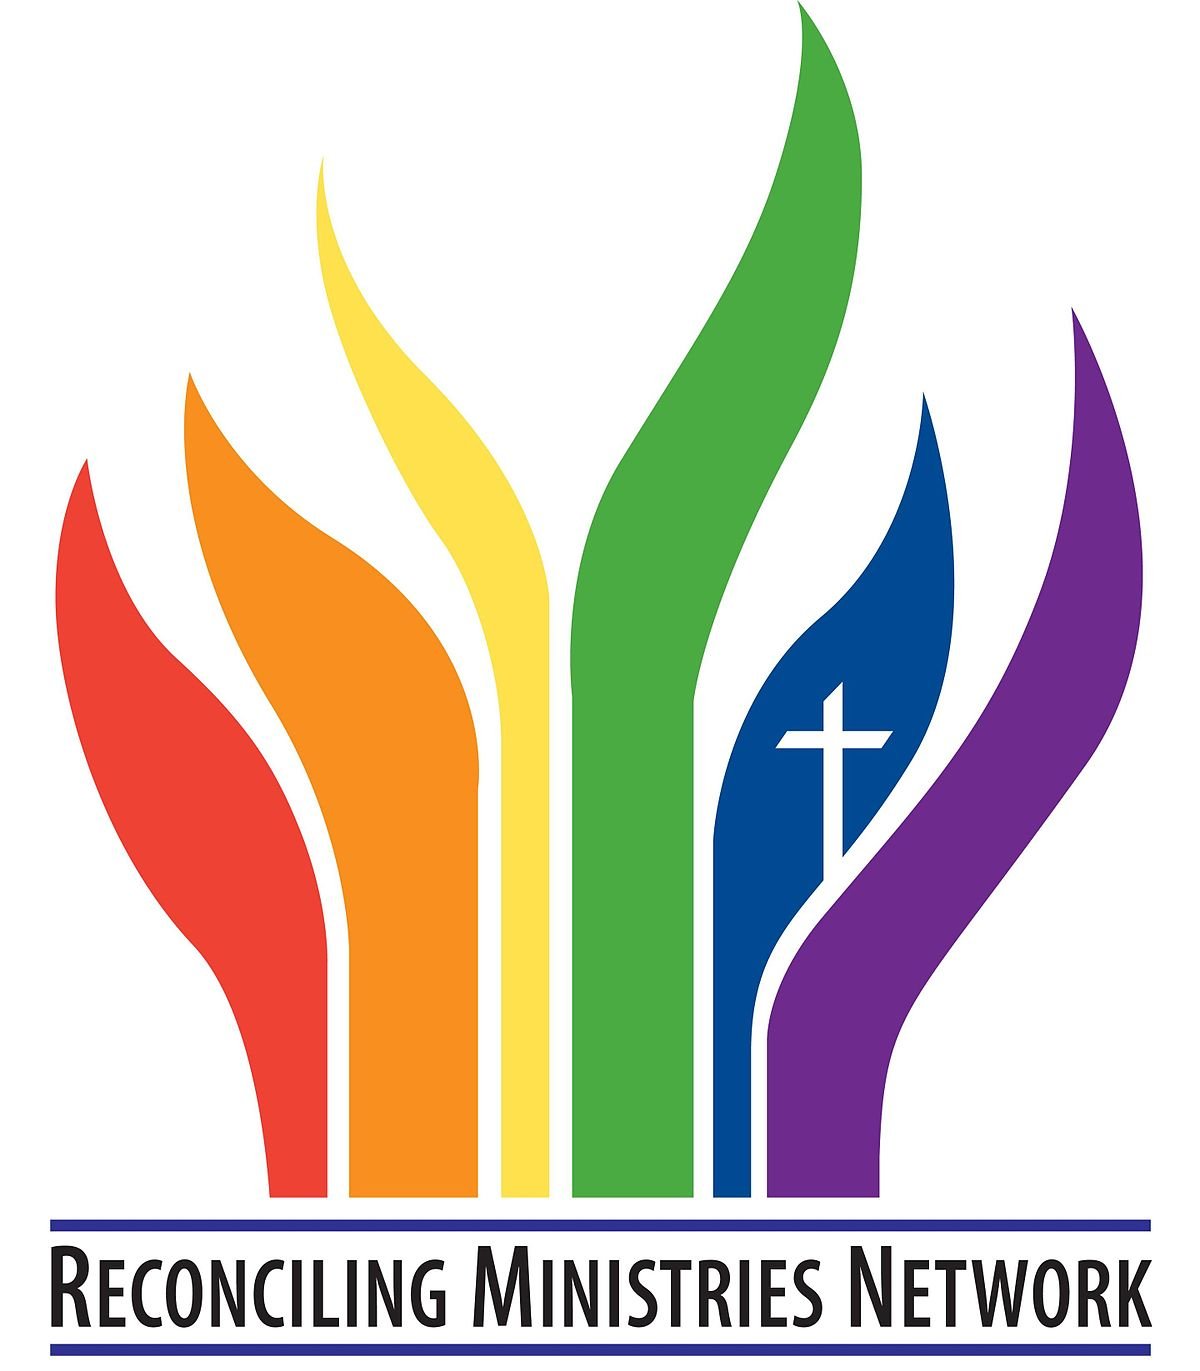 Reconciling-Ministries-Network-Logo.jpg